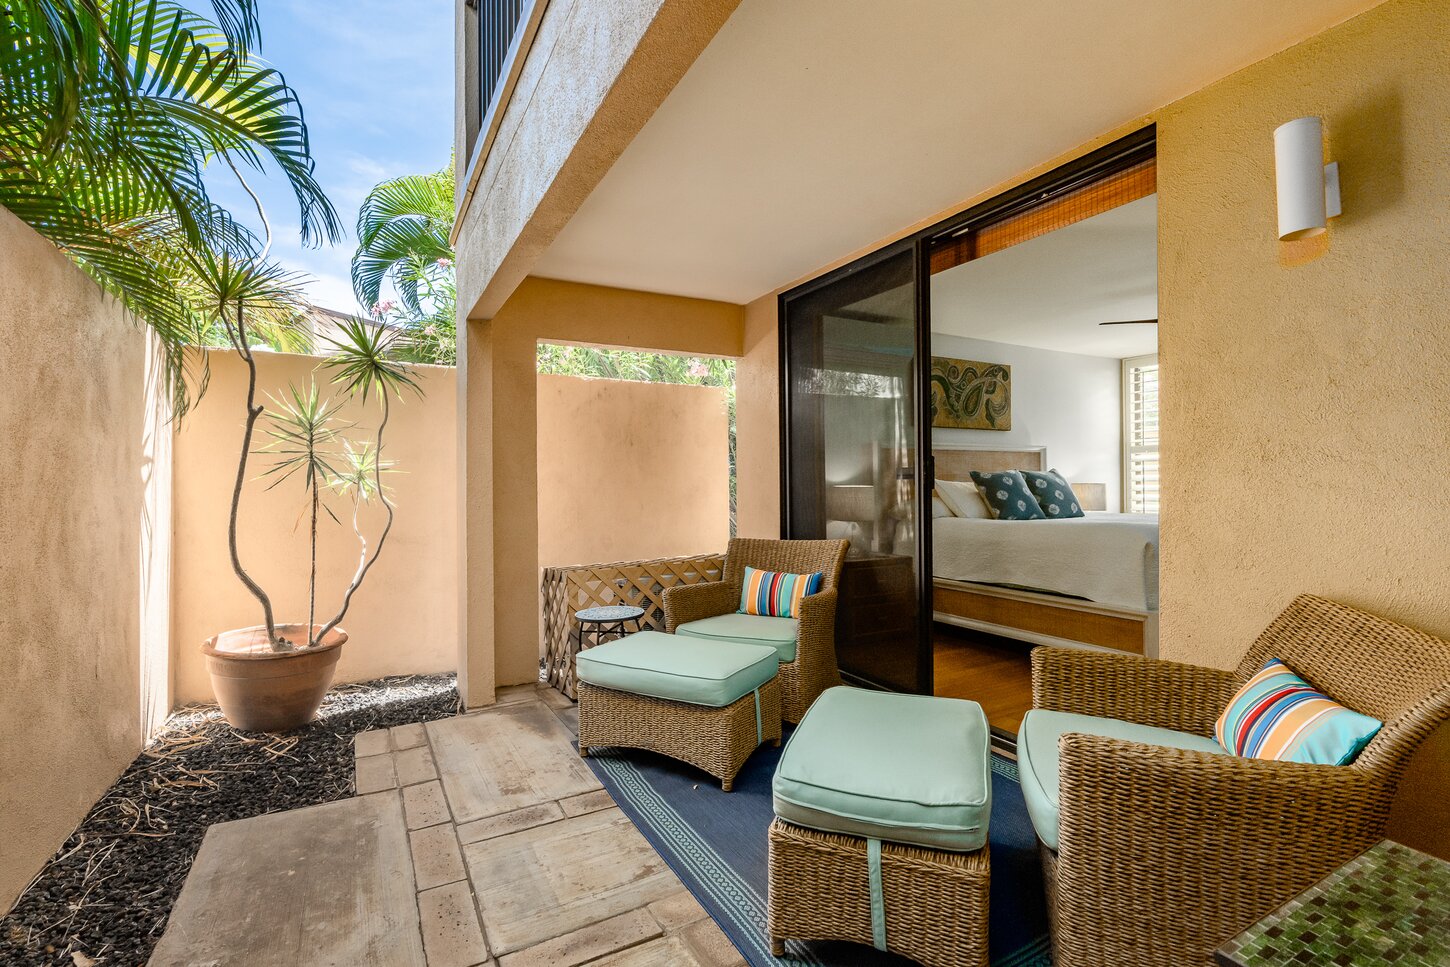 A private second lanai is just off the bedroom. Please water our rosemary bush while you are reading and relaxing!